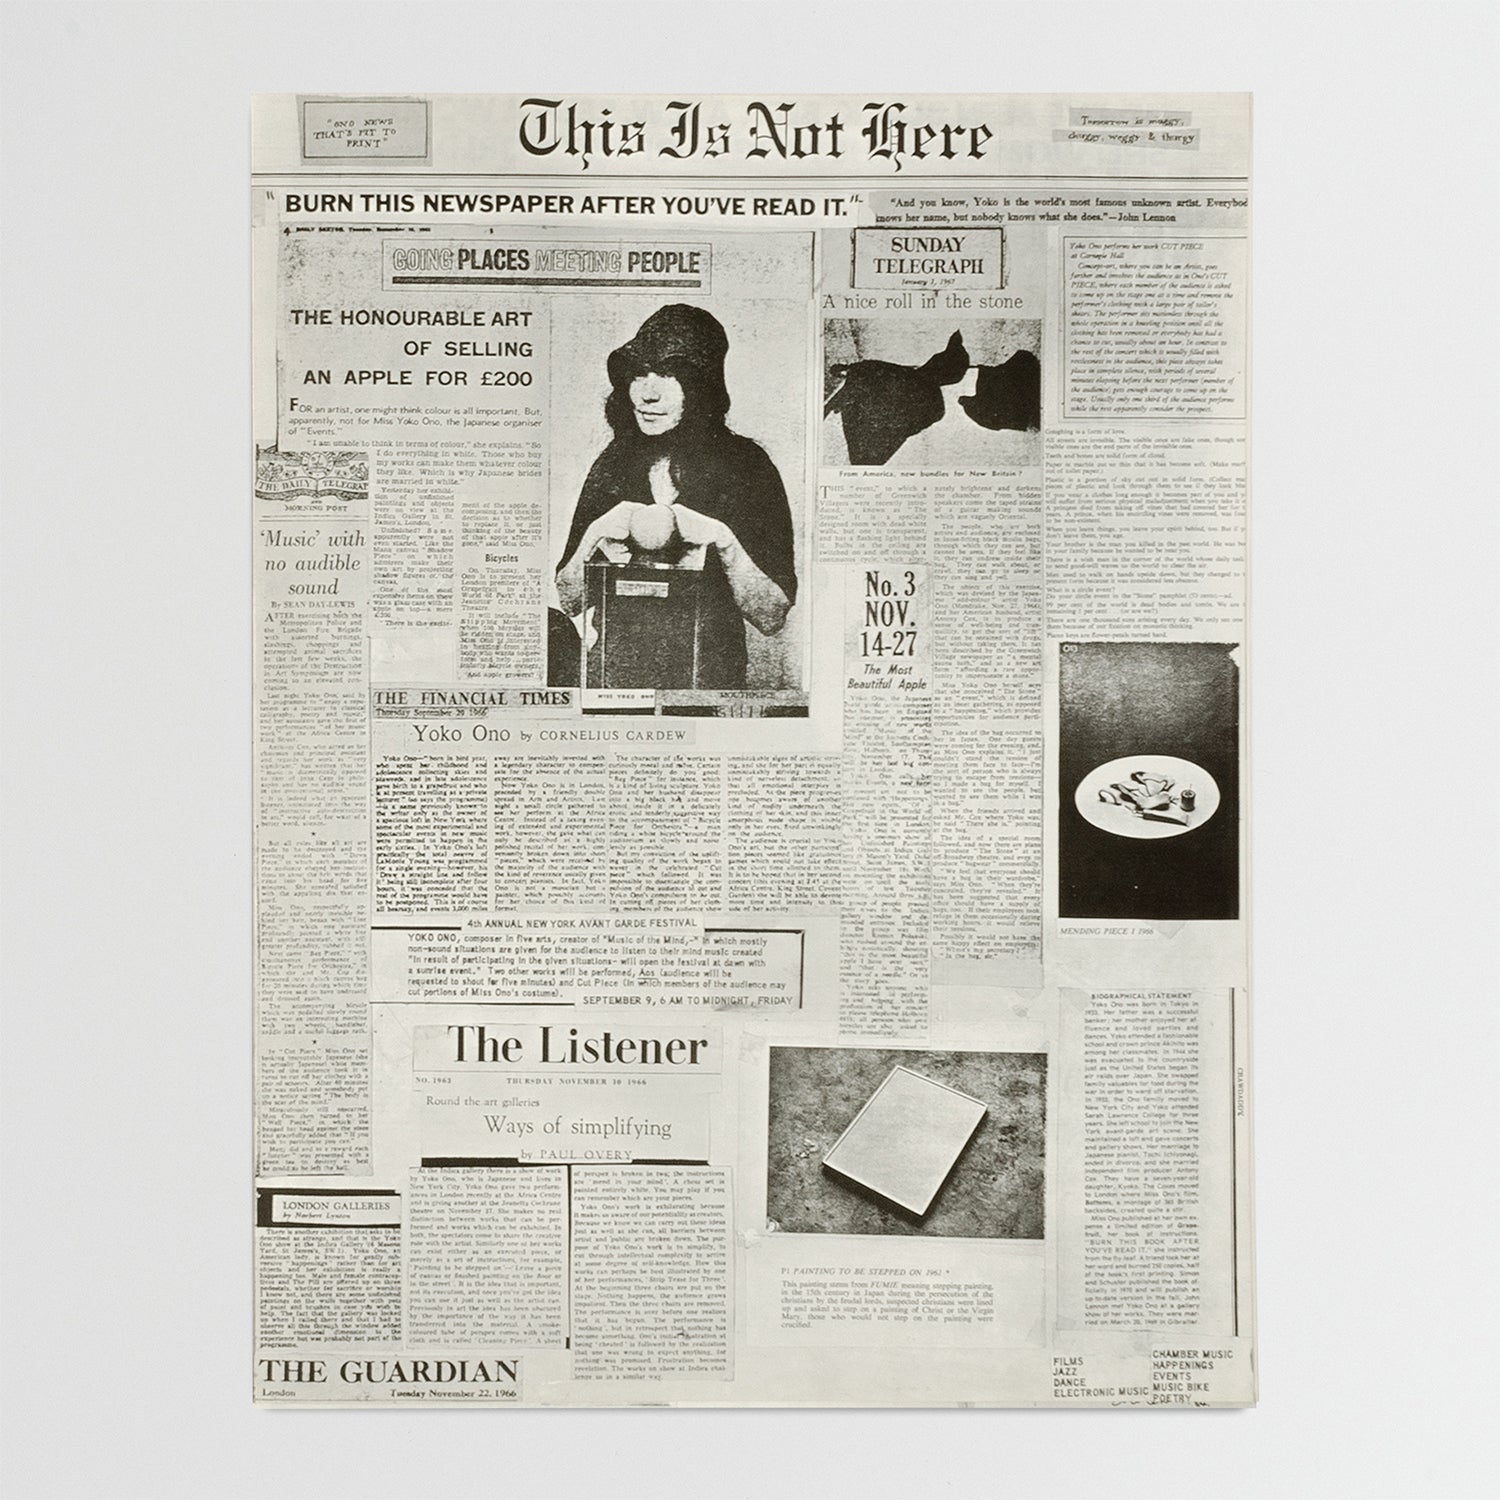 This Is Not Here | Yoko Ono